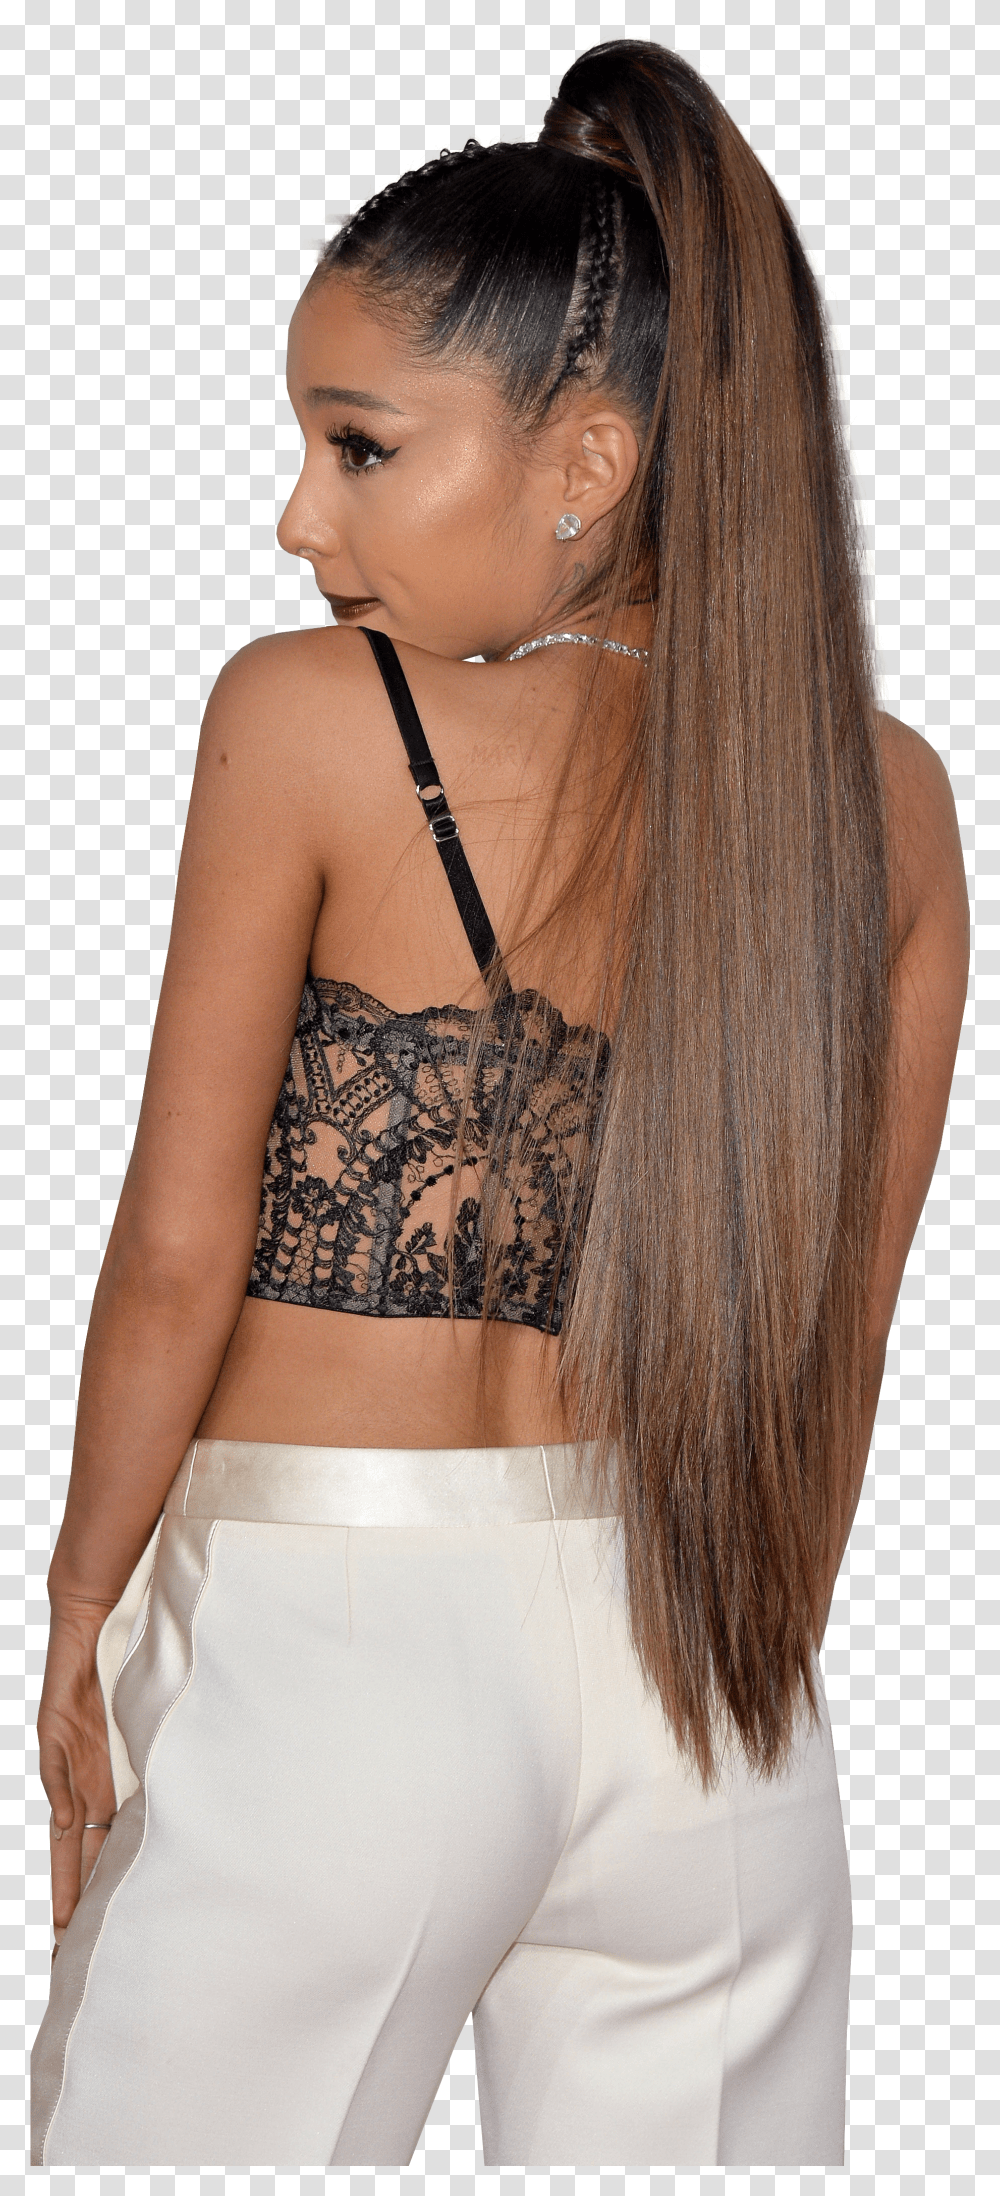 Ariana Grande In White Trousers Image Ariana Grande Transparent Png